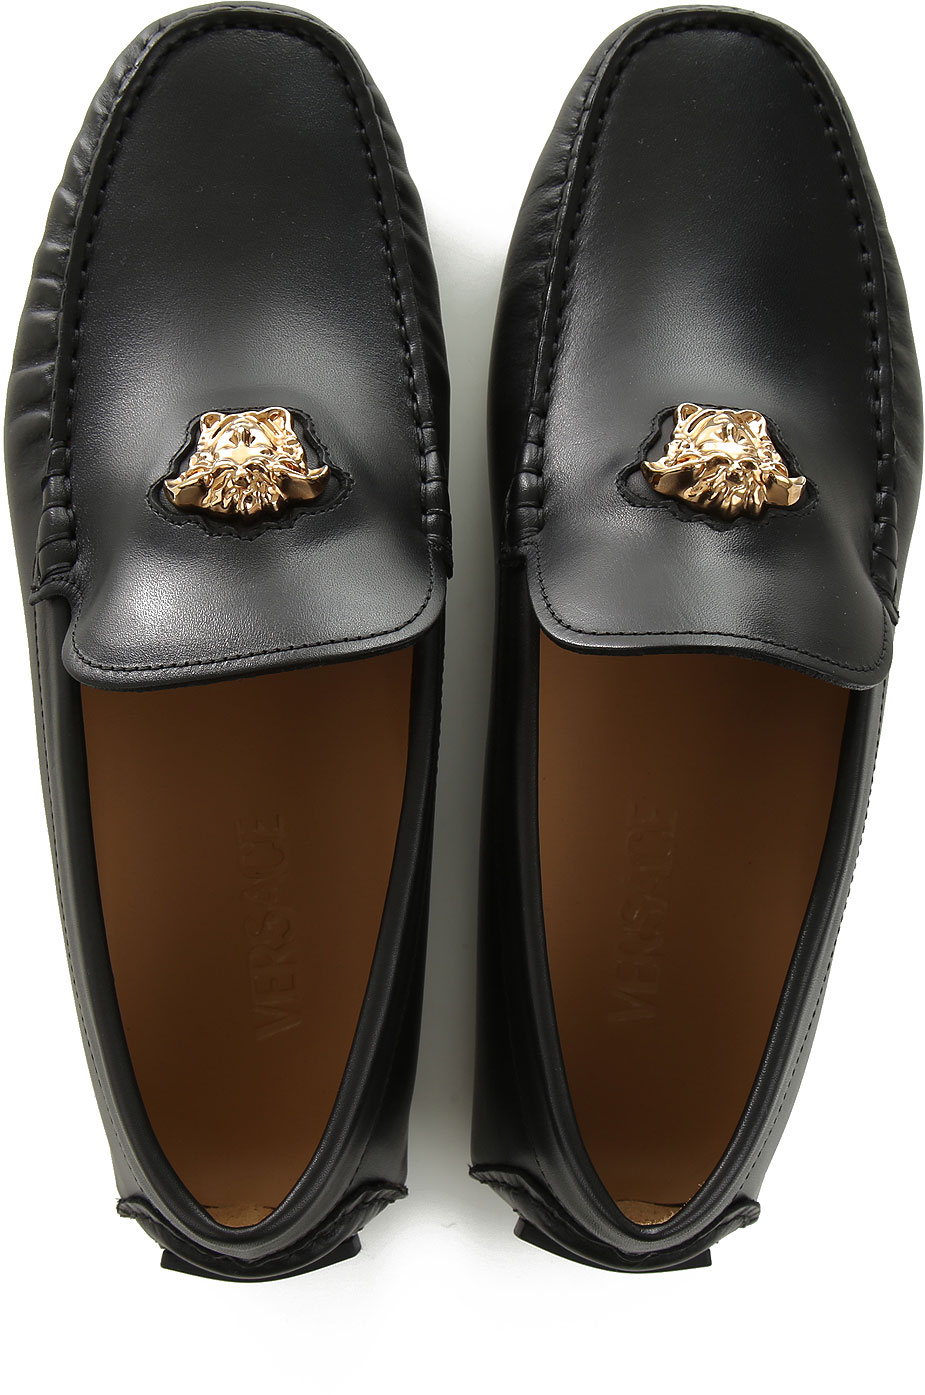 Mens Shoes Versace, Style code: 1003701-1a00693-1b00v